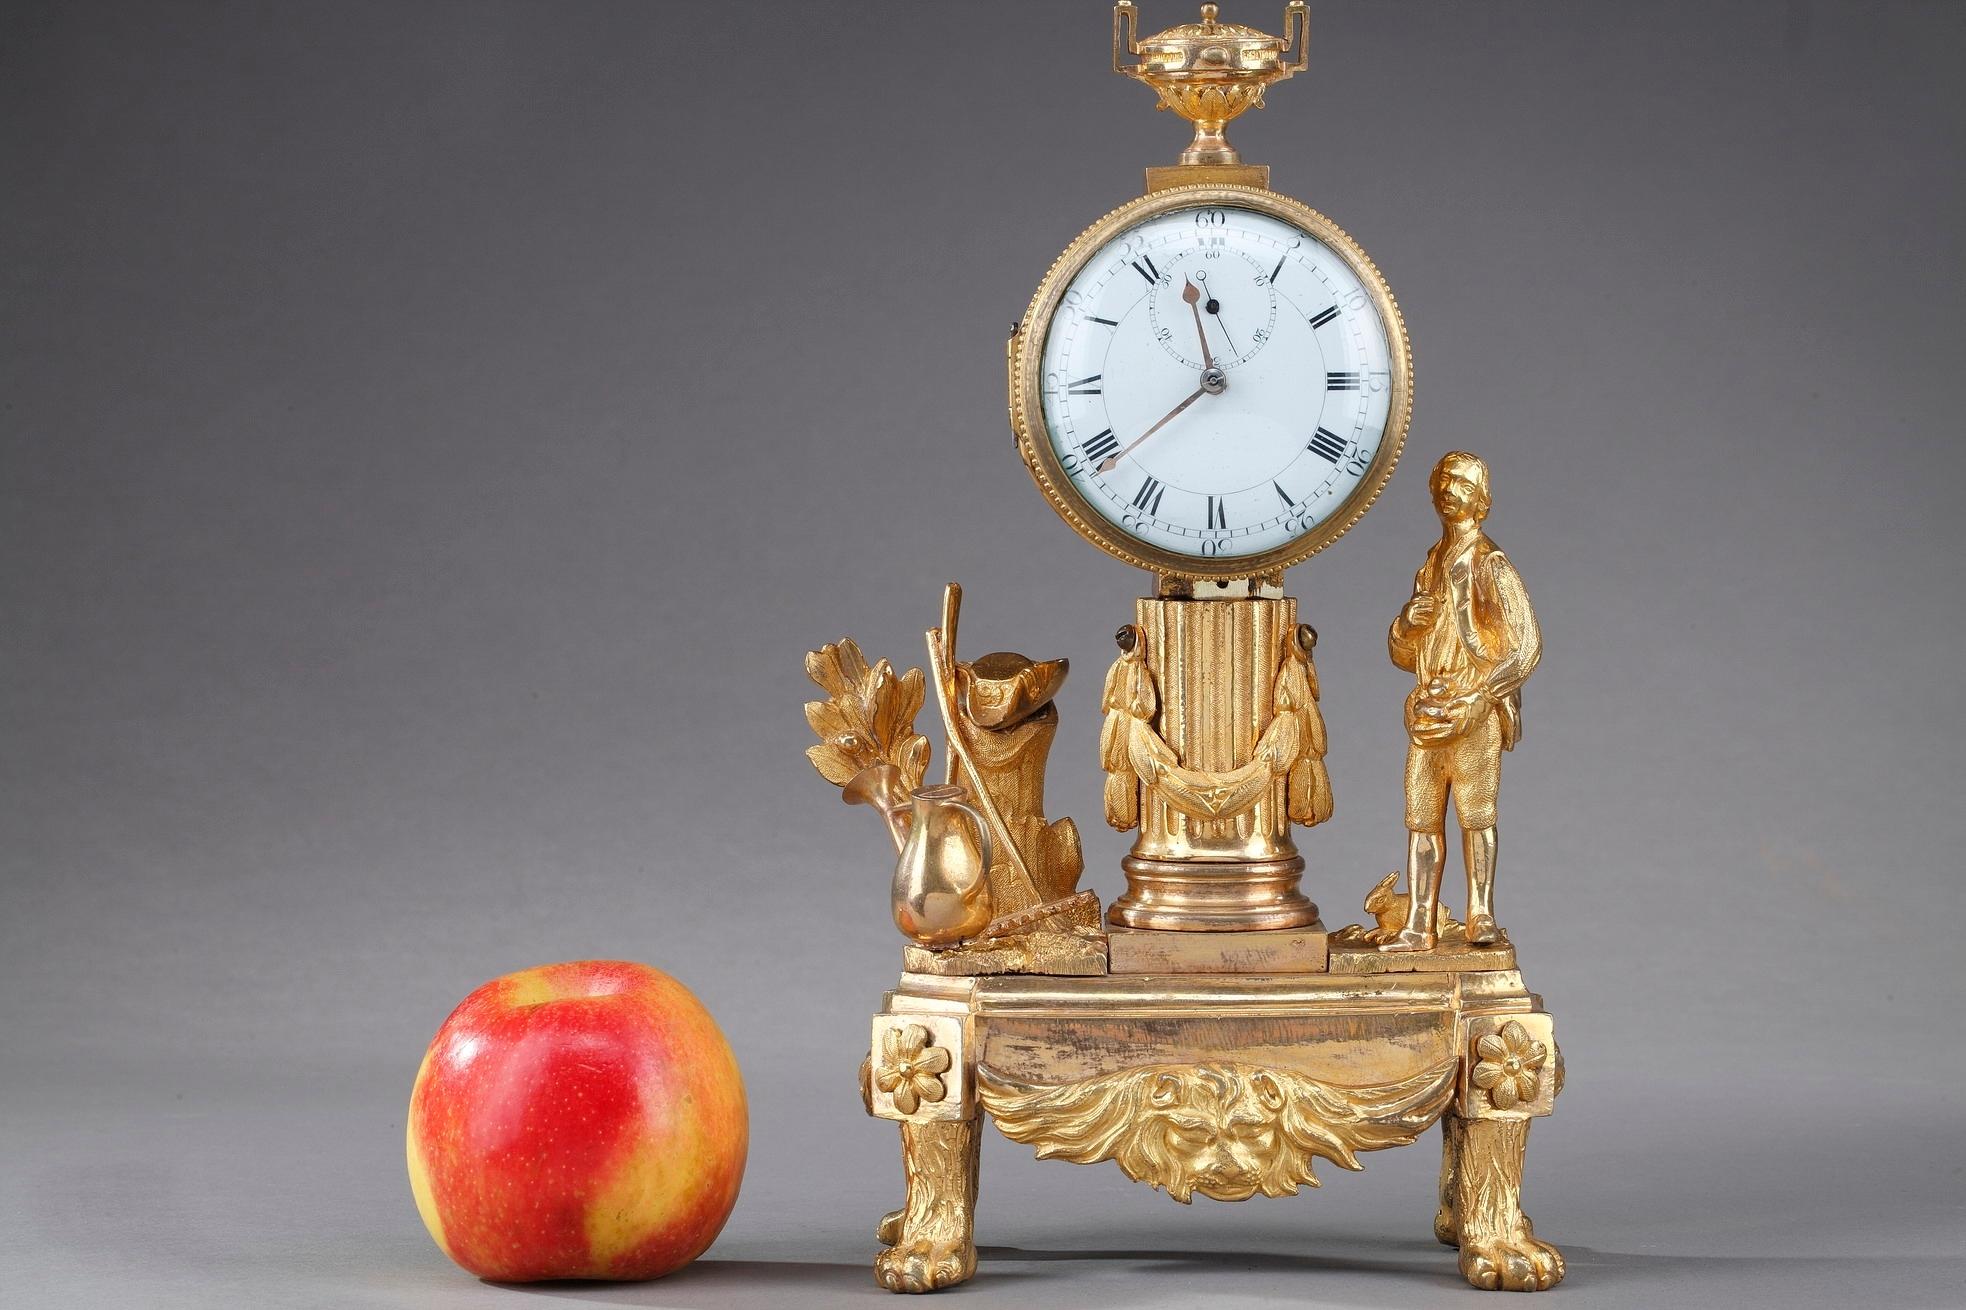 Small mantle clock crafted of gilt bronze, or ormolu, featuring an allegory of the gardener. He is surrounded by a rabbit and some gardening tools: a watering can, a shovel and a rake. The pastoral subject illustrates the taste of Jean-Jacques